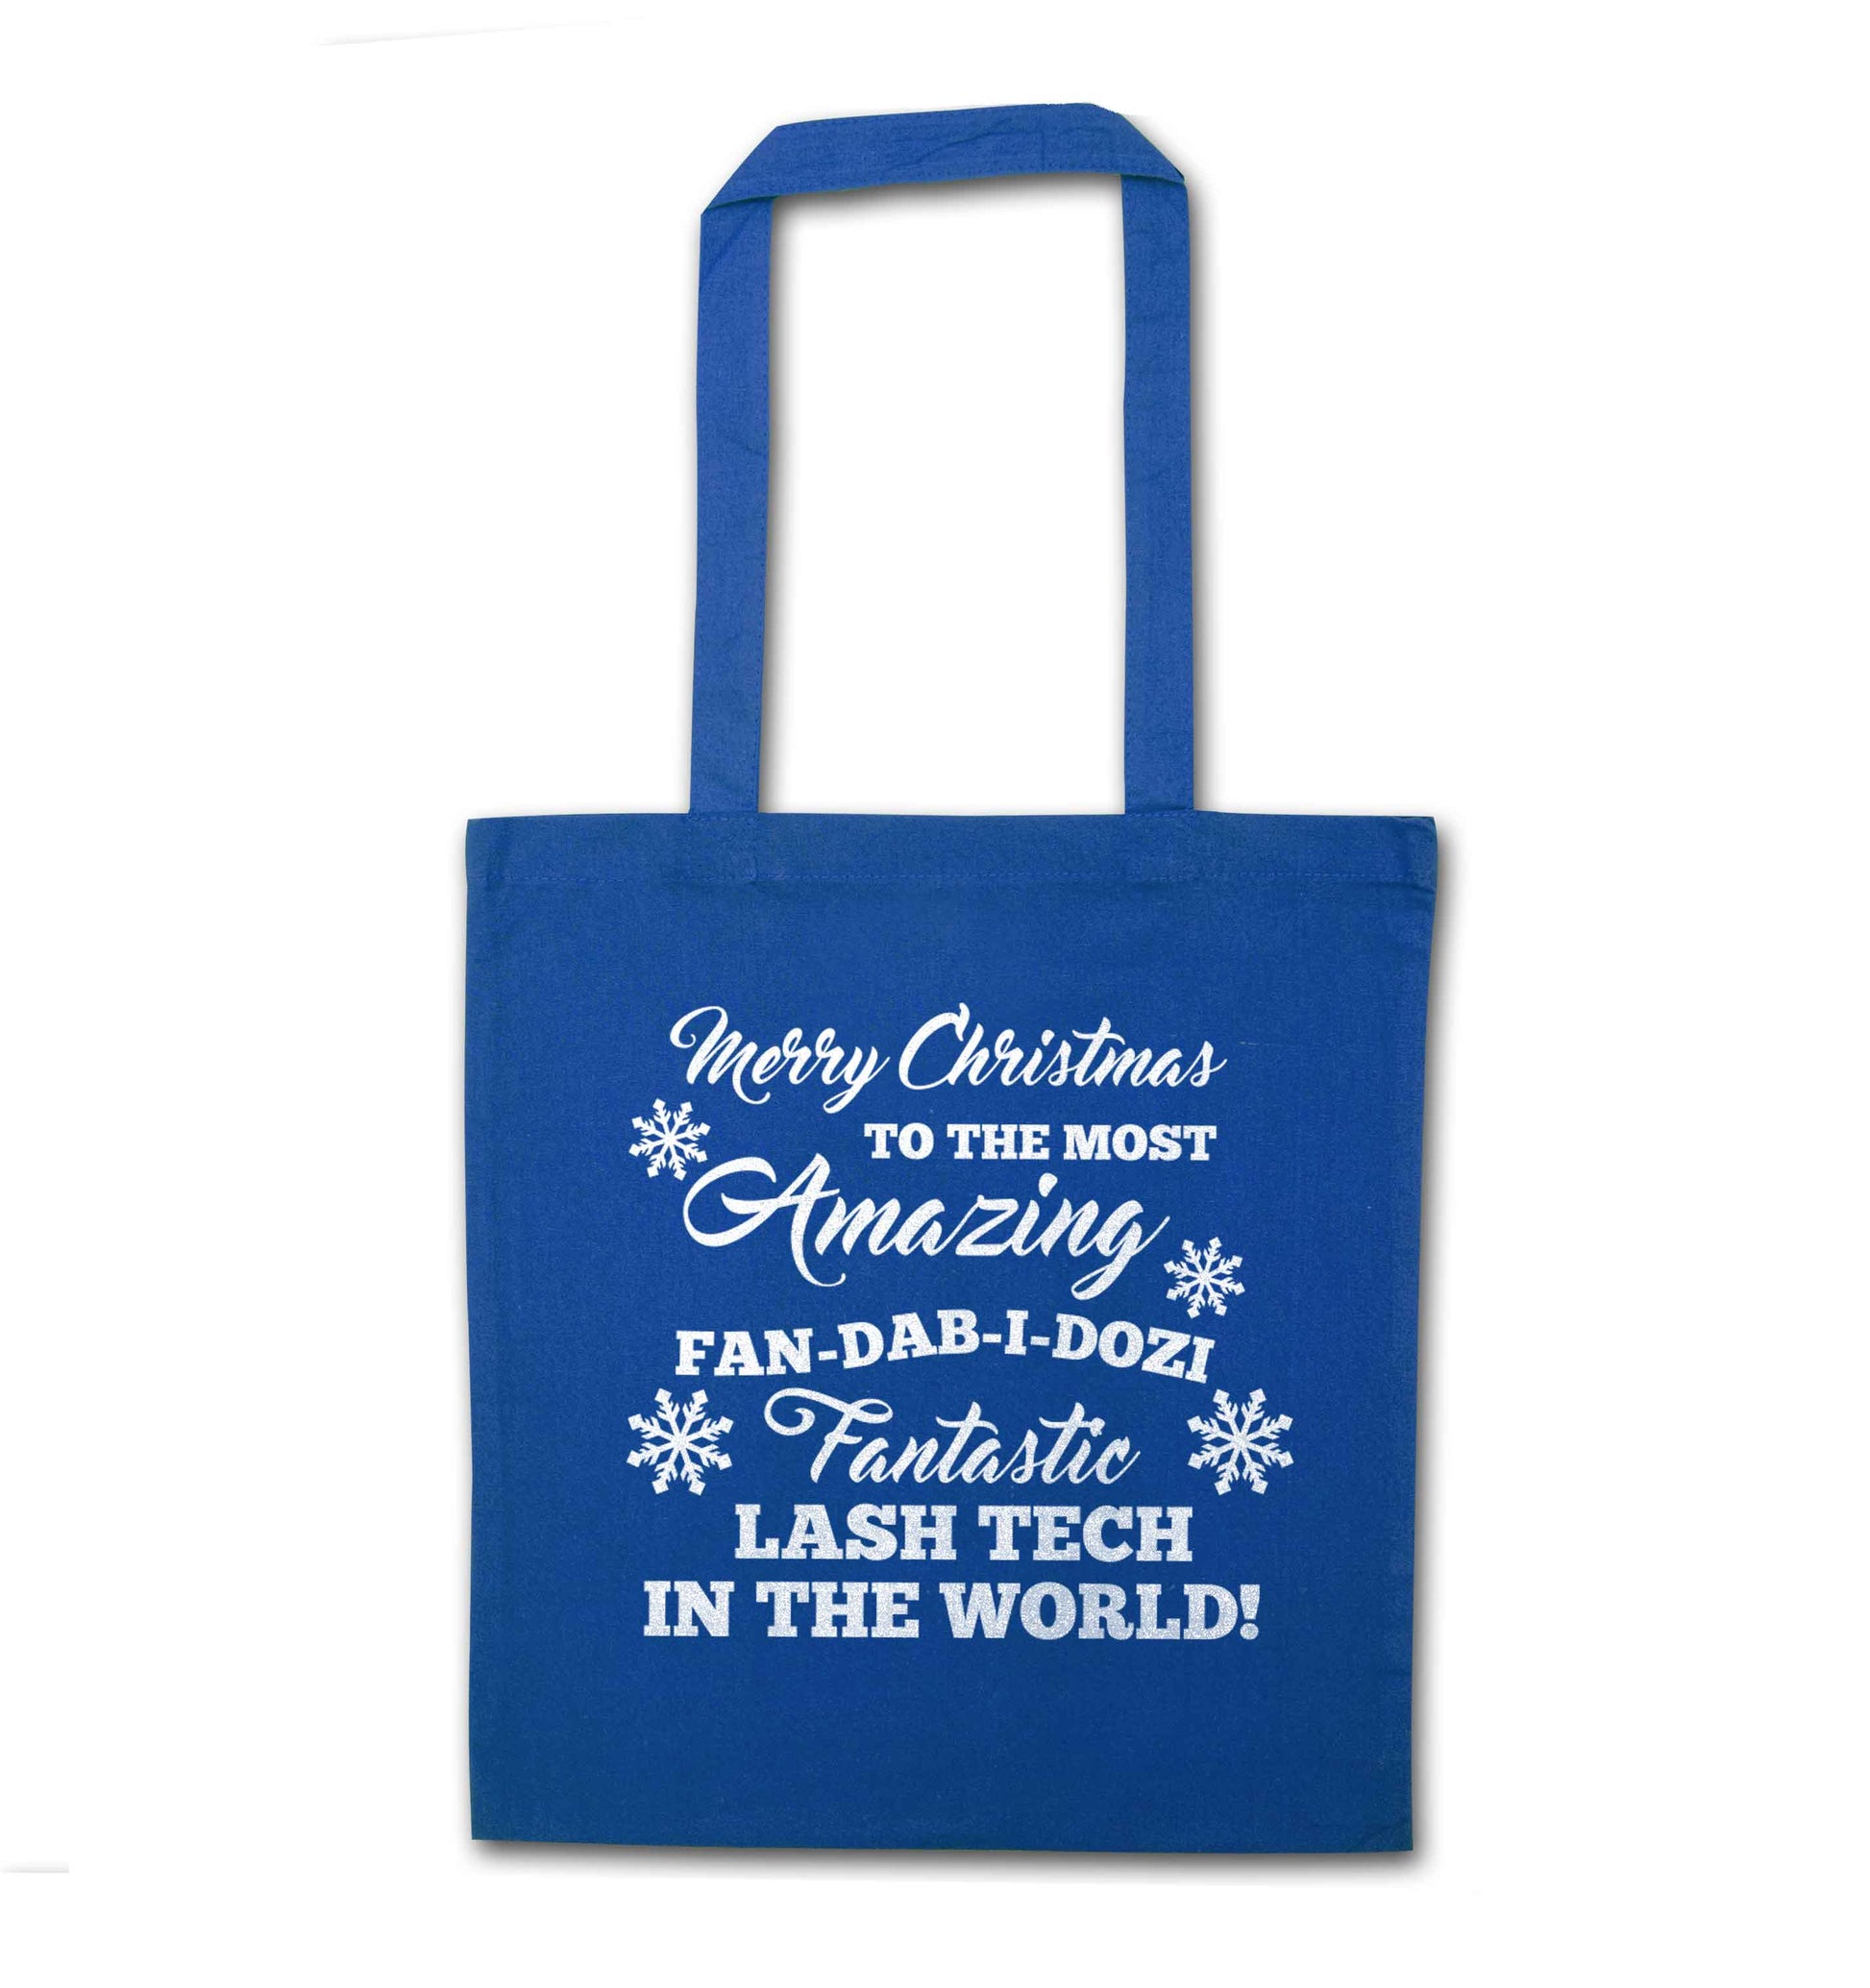 Merry Christmas to the most amazing fan-dab-i-dozi fantasic lash tech in the world blue tote bag